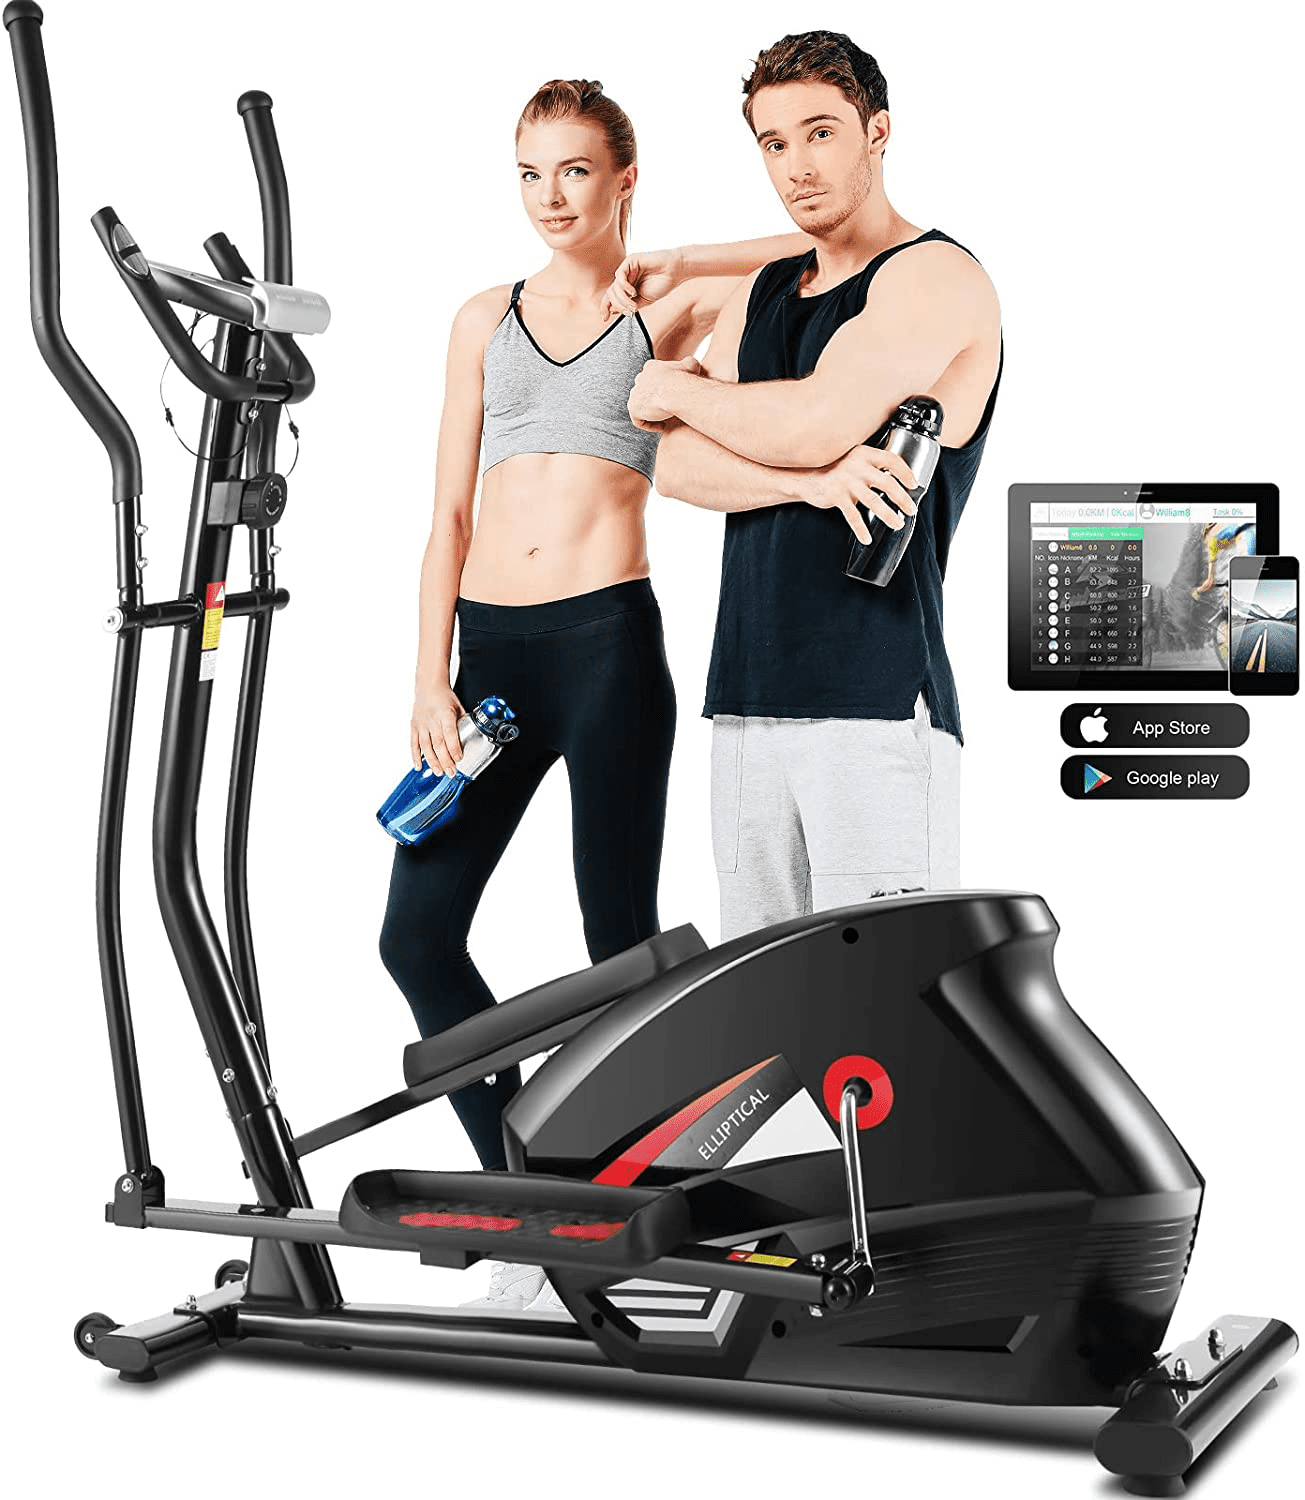 LCD Monitor ANCHEER Elliptical Machine Cross Trainer for Home Use Cardio Fitness Equipment Gym Fitness Machine with 10 Level Magnetic Resistance 390LBs Max Weight Load 